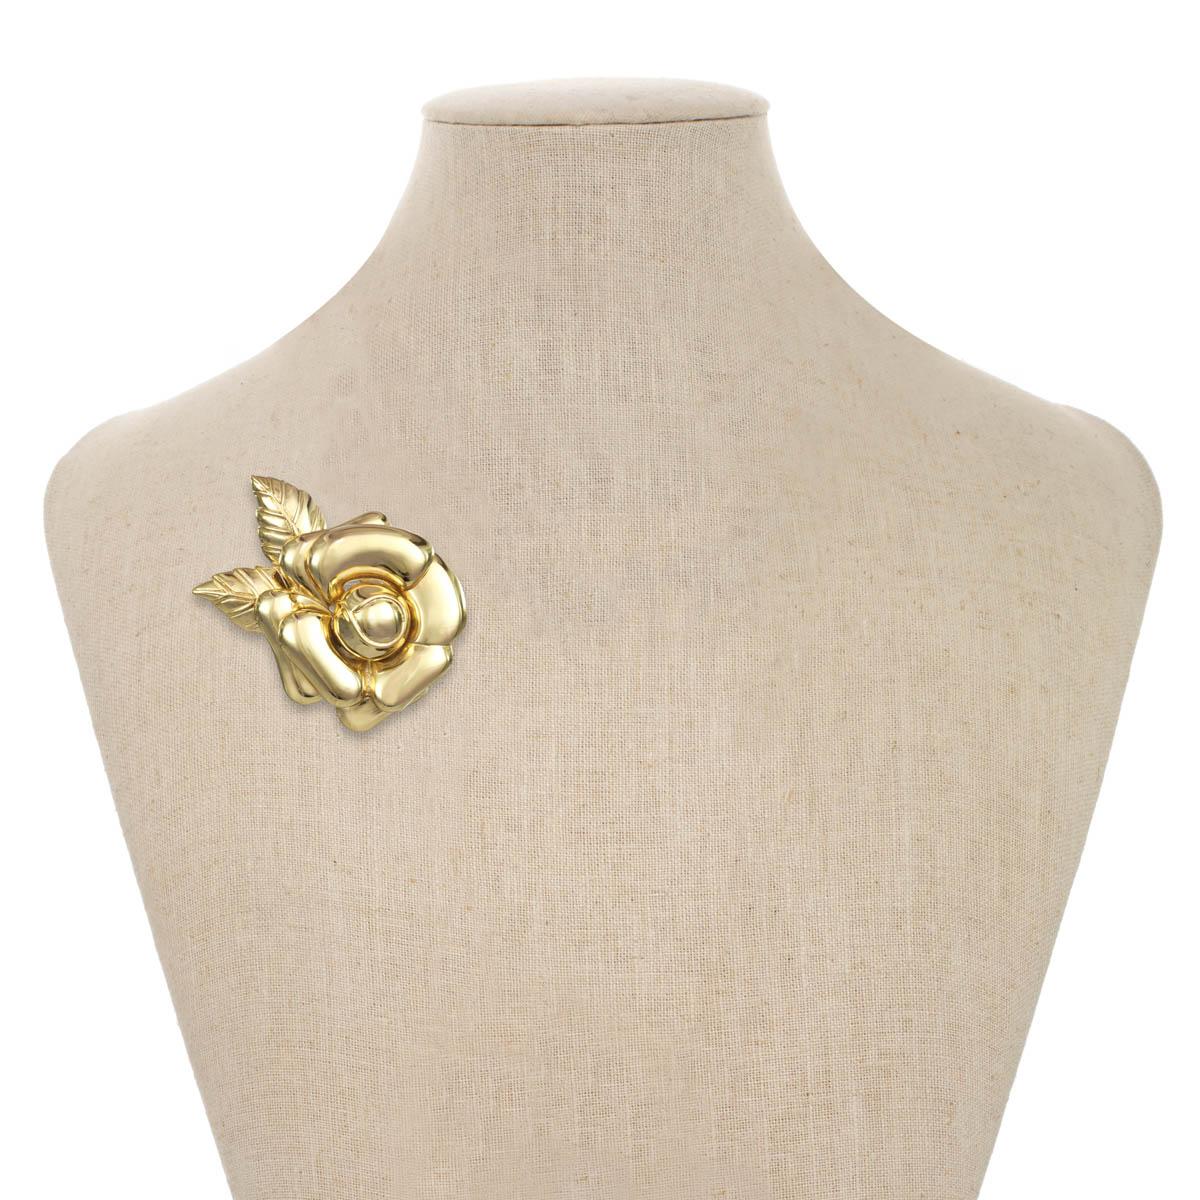 Pins are in! Bold and beautiful, this polished gold rose pin will look stunning on any jacket you choose, to transition from summer to fall!
Materials
Pewter
18K Gold Plating
Brass Pin and Catch
Dimensions:
Length: 3